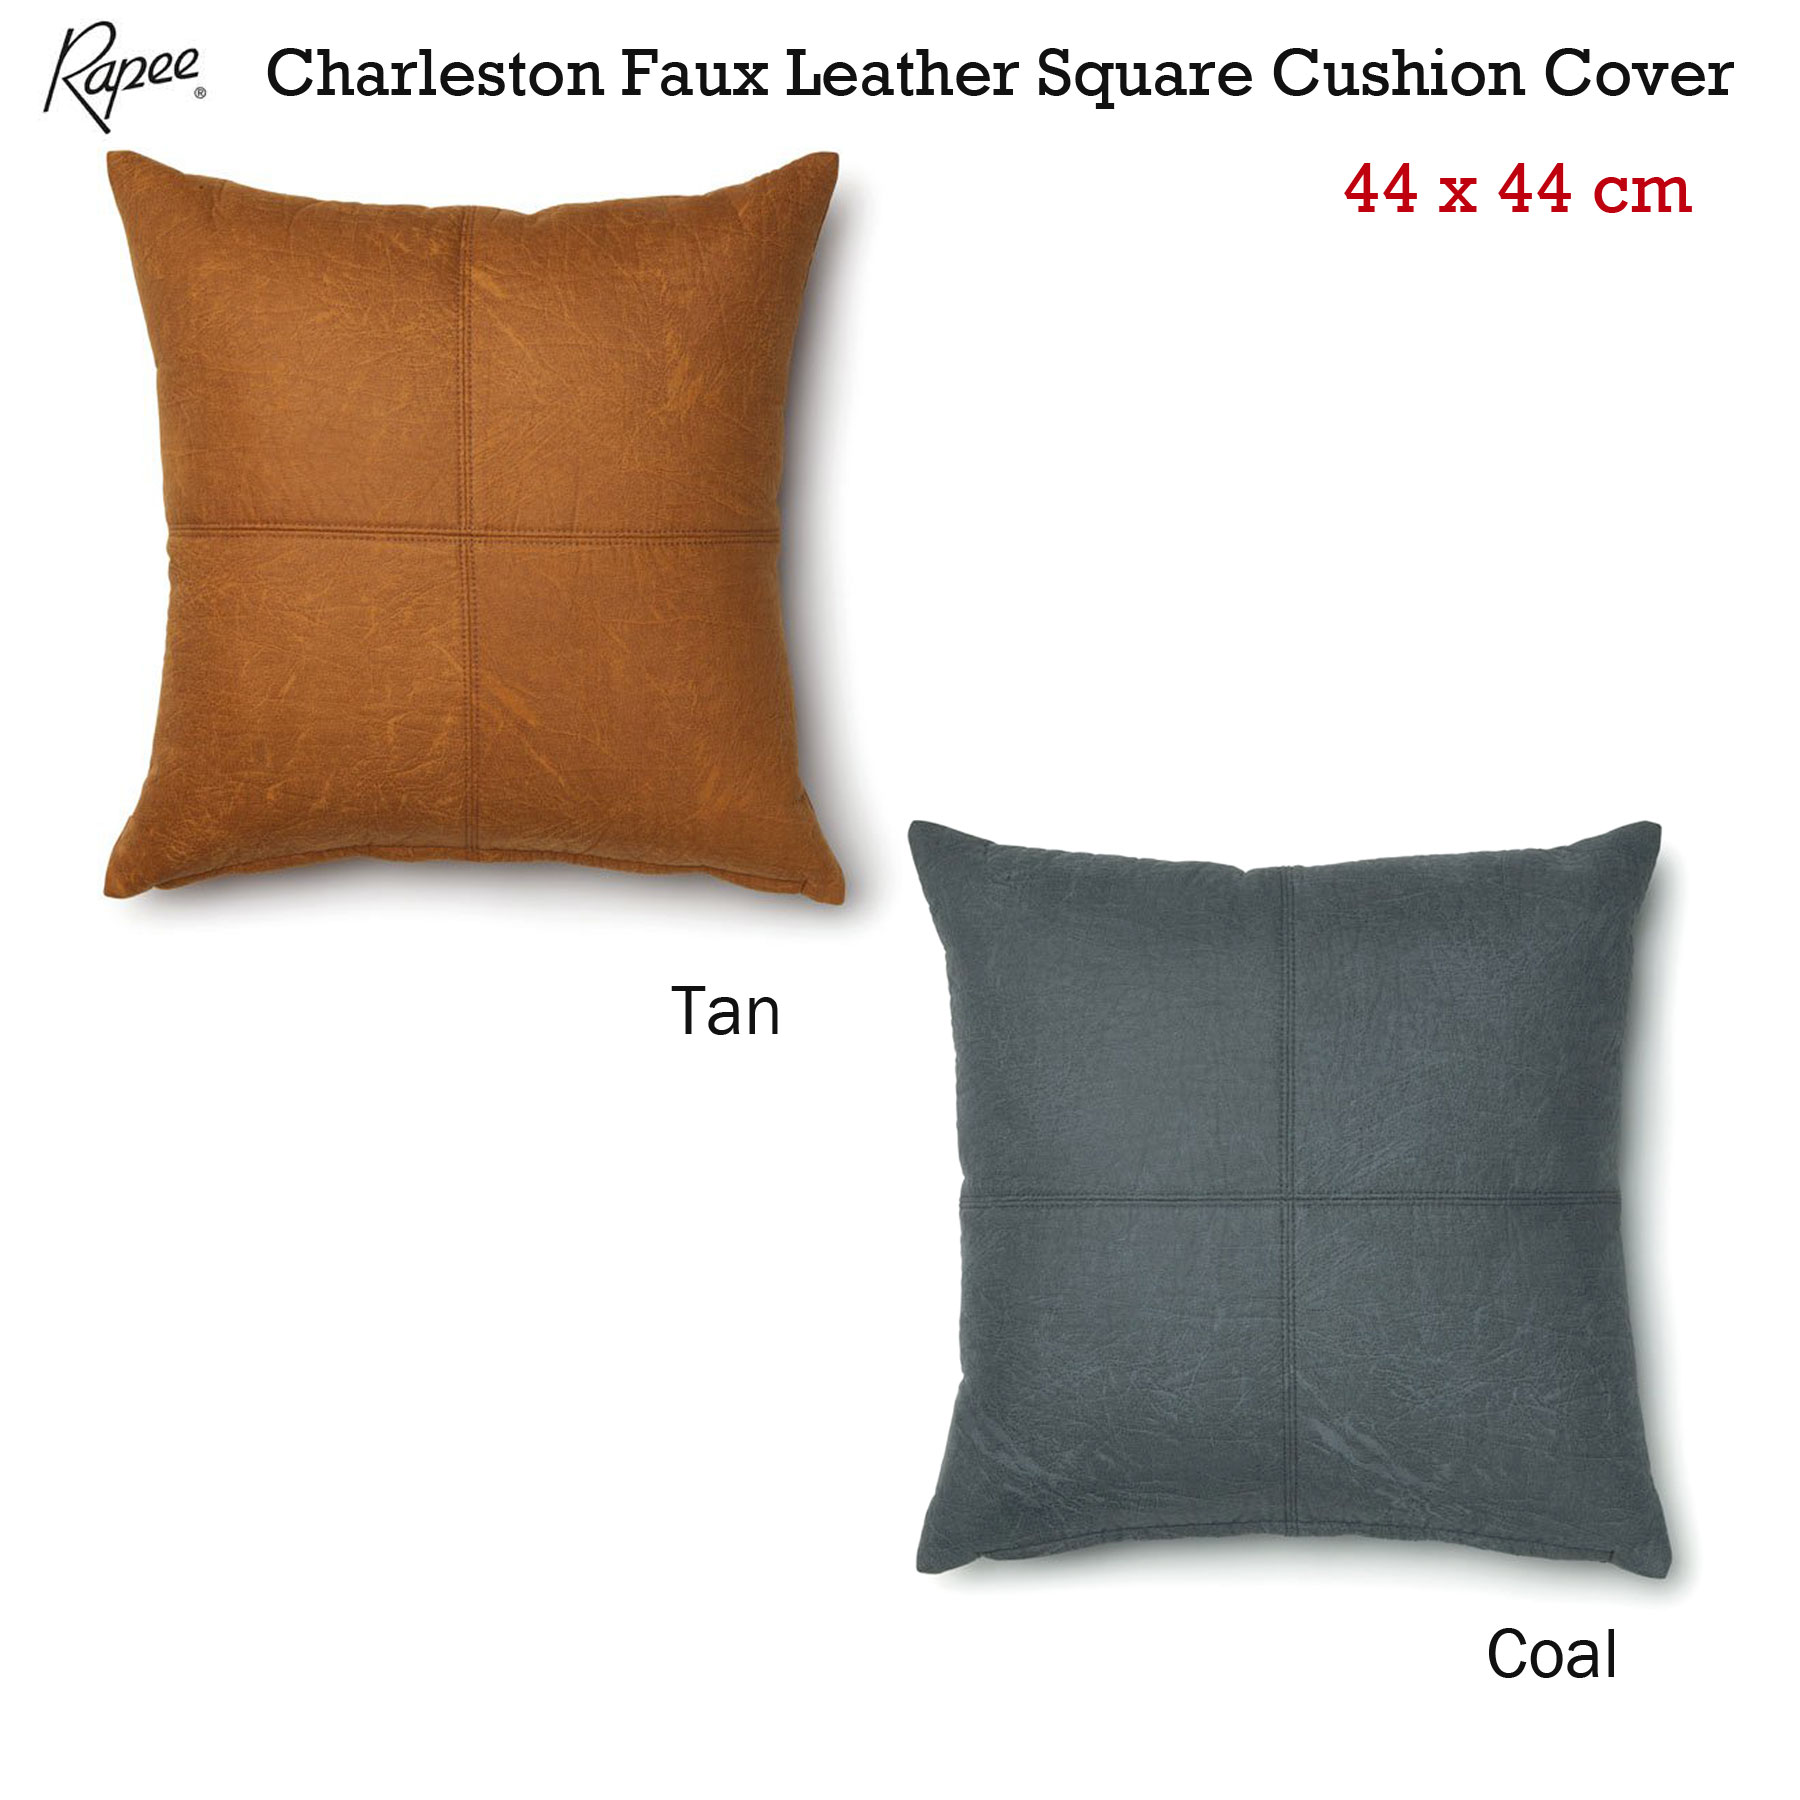 Charleston Faux Leather Cushion Cover 